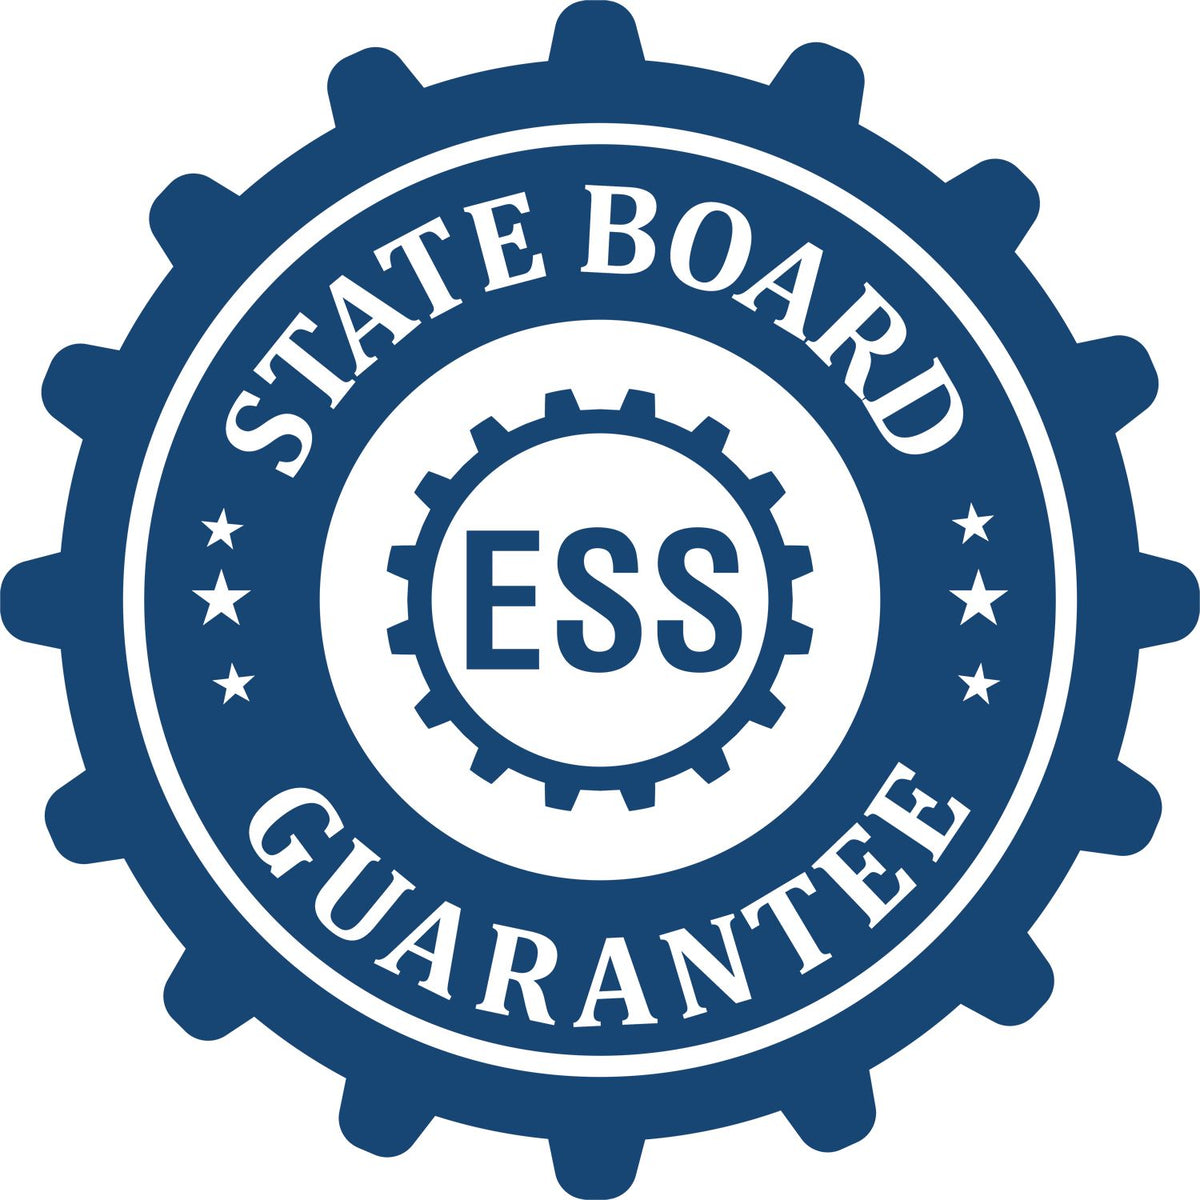 An emblem in a gear shape illustrating a state board guarantee for the Hybrid Illinois Landscape Architect Seal